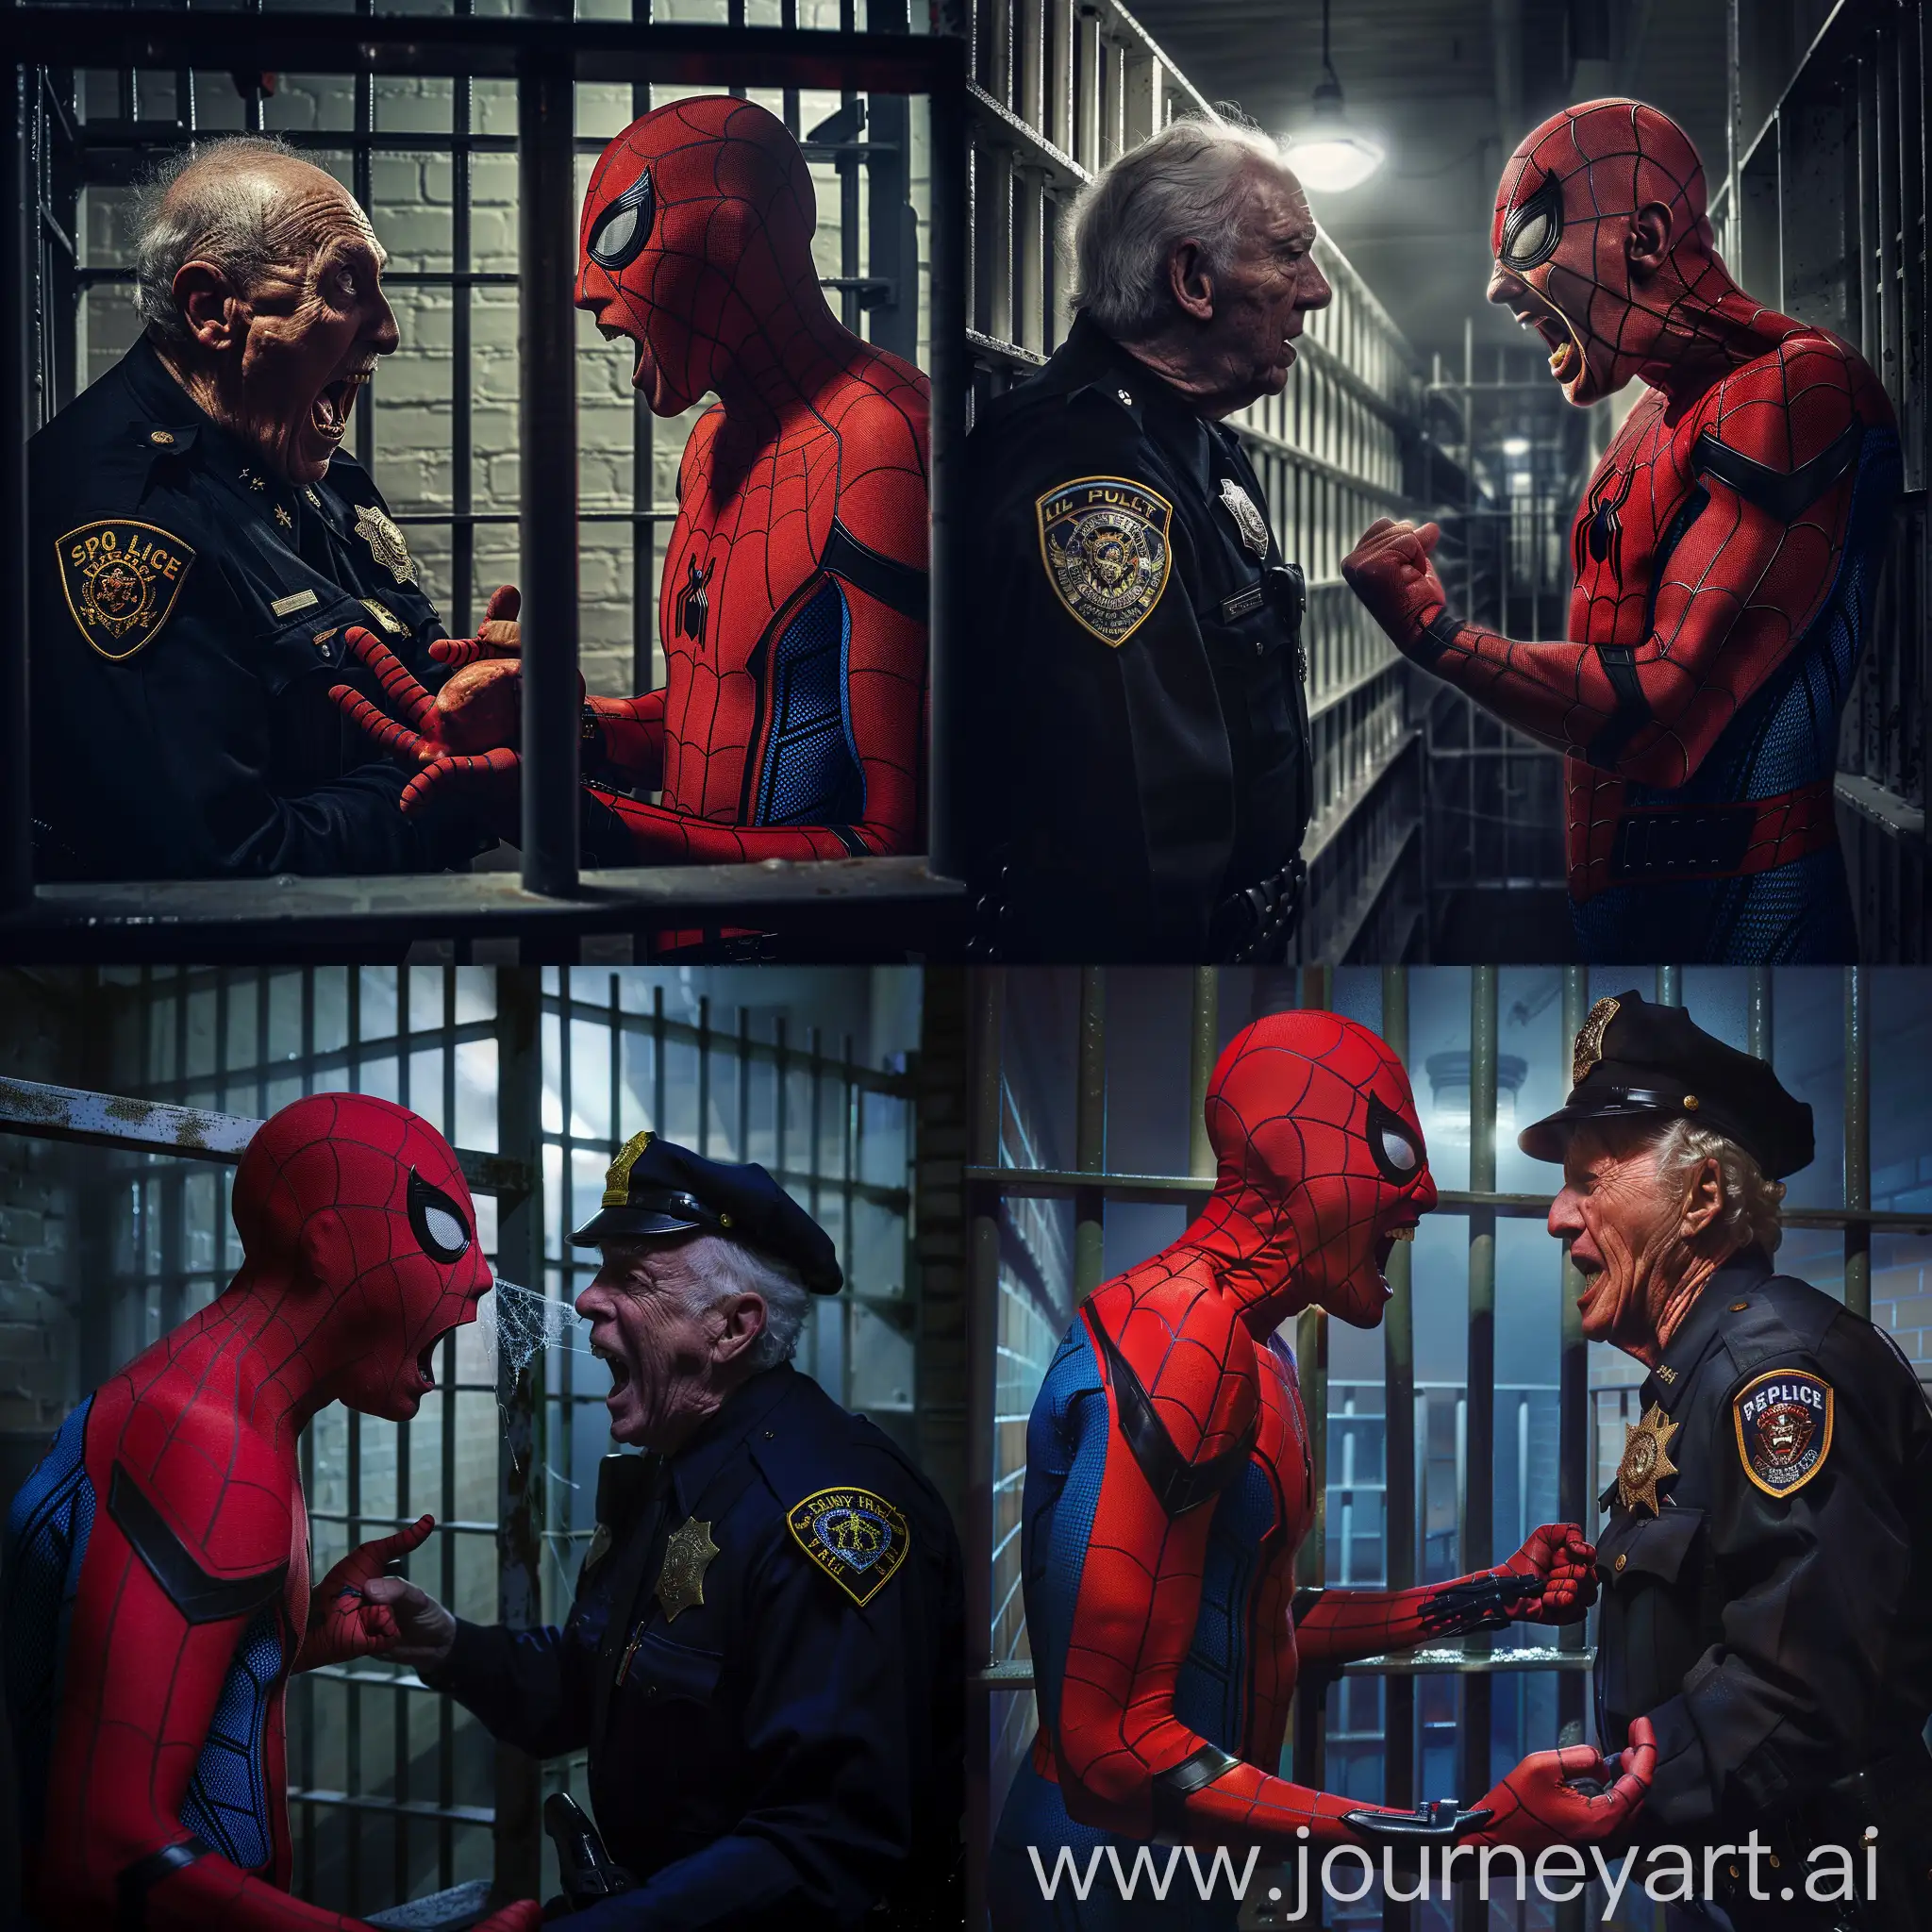 spiderman being yelled at by an angry elderly policeman inside a jail cell at night